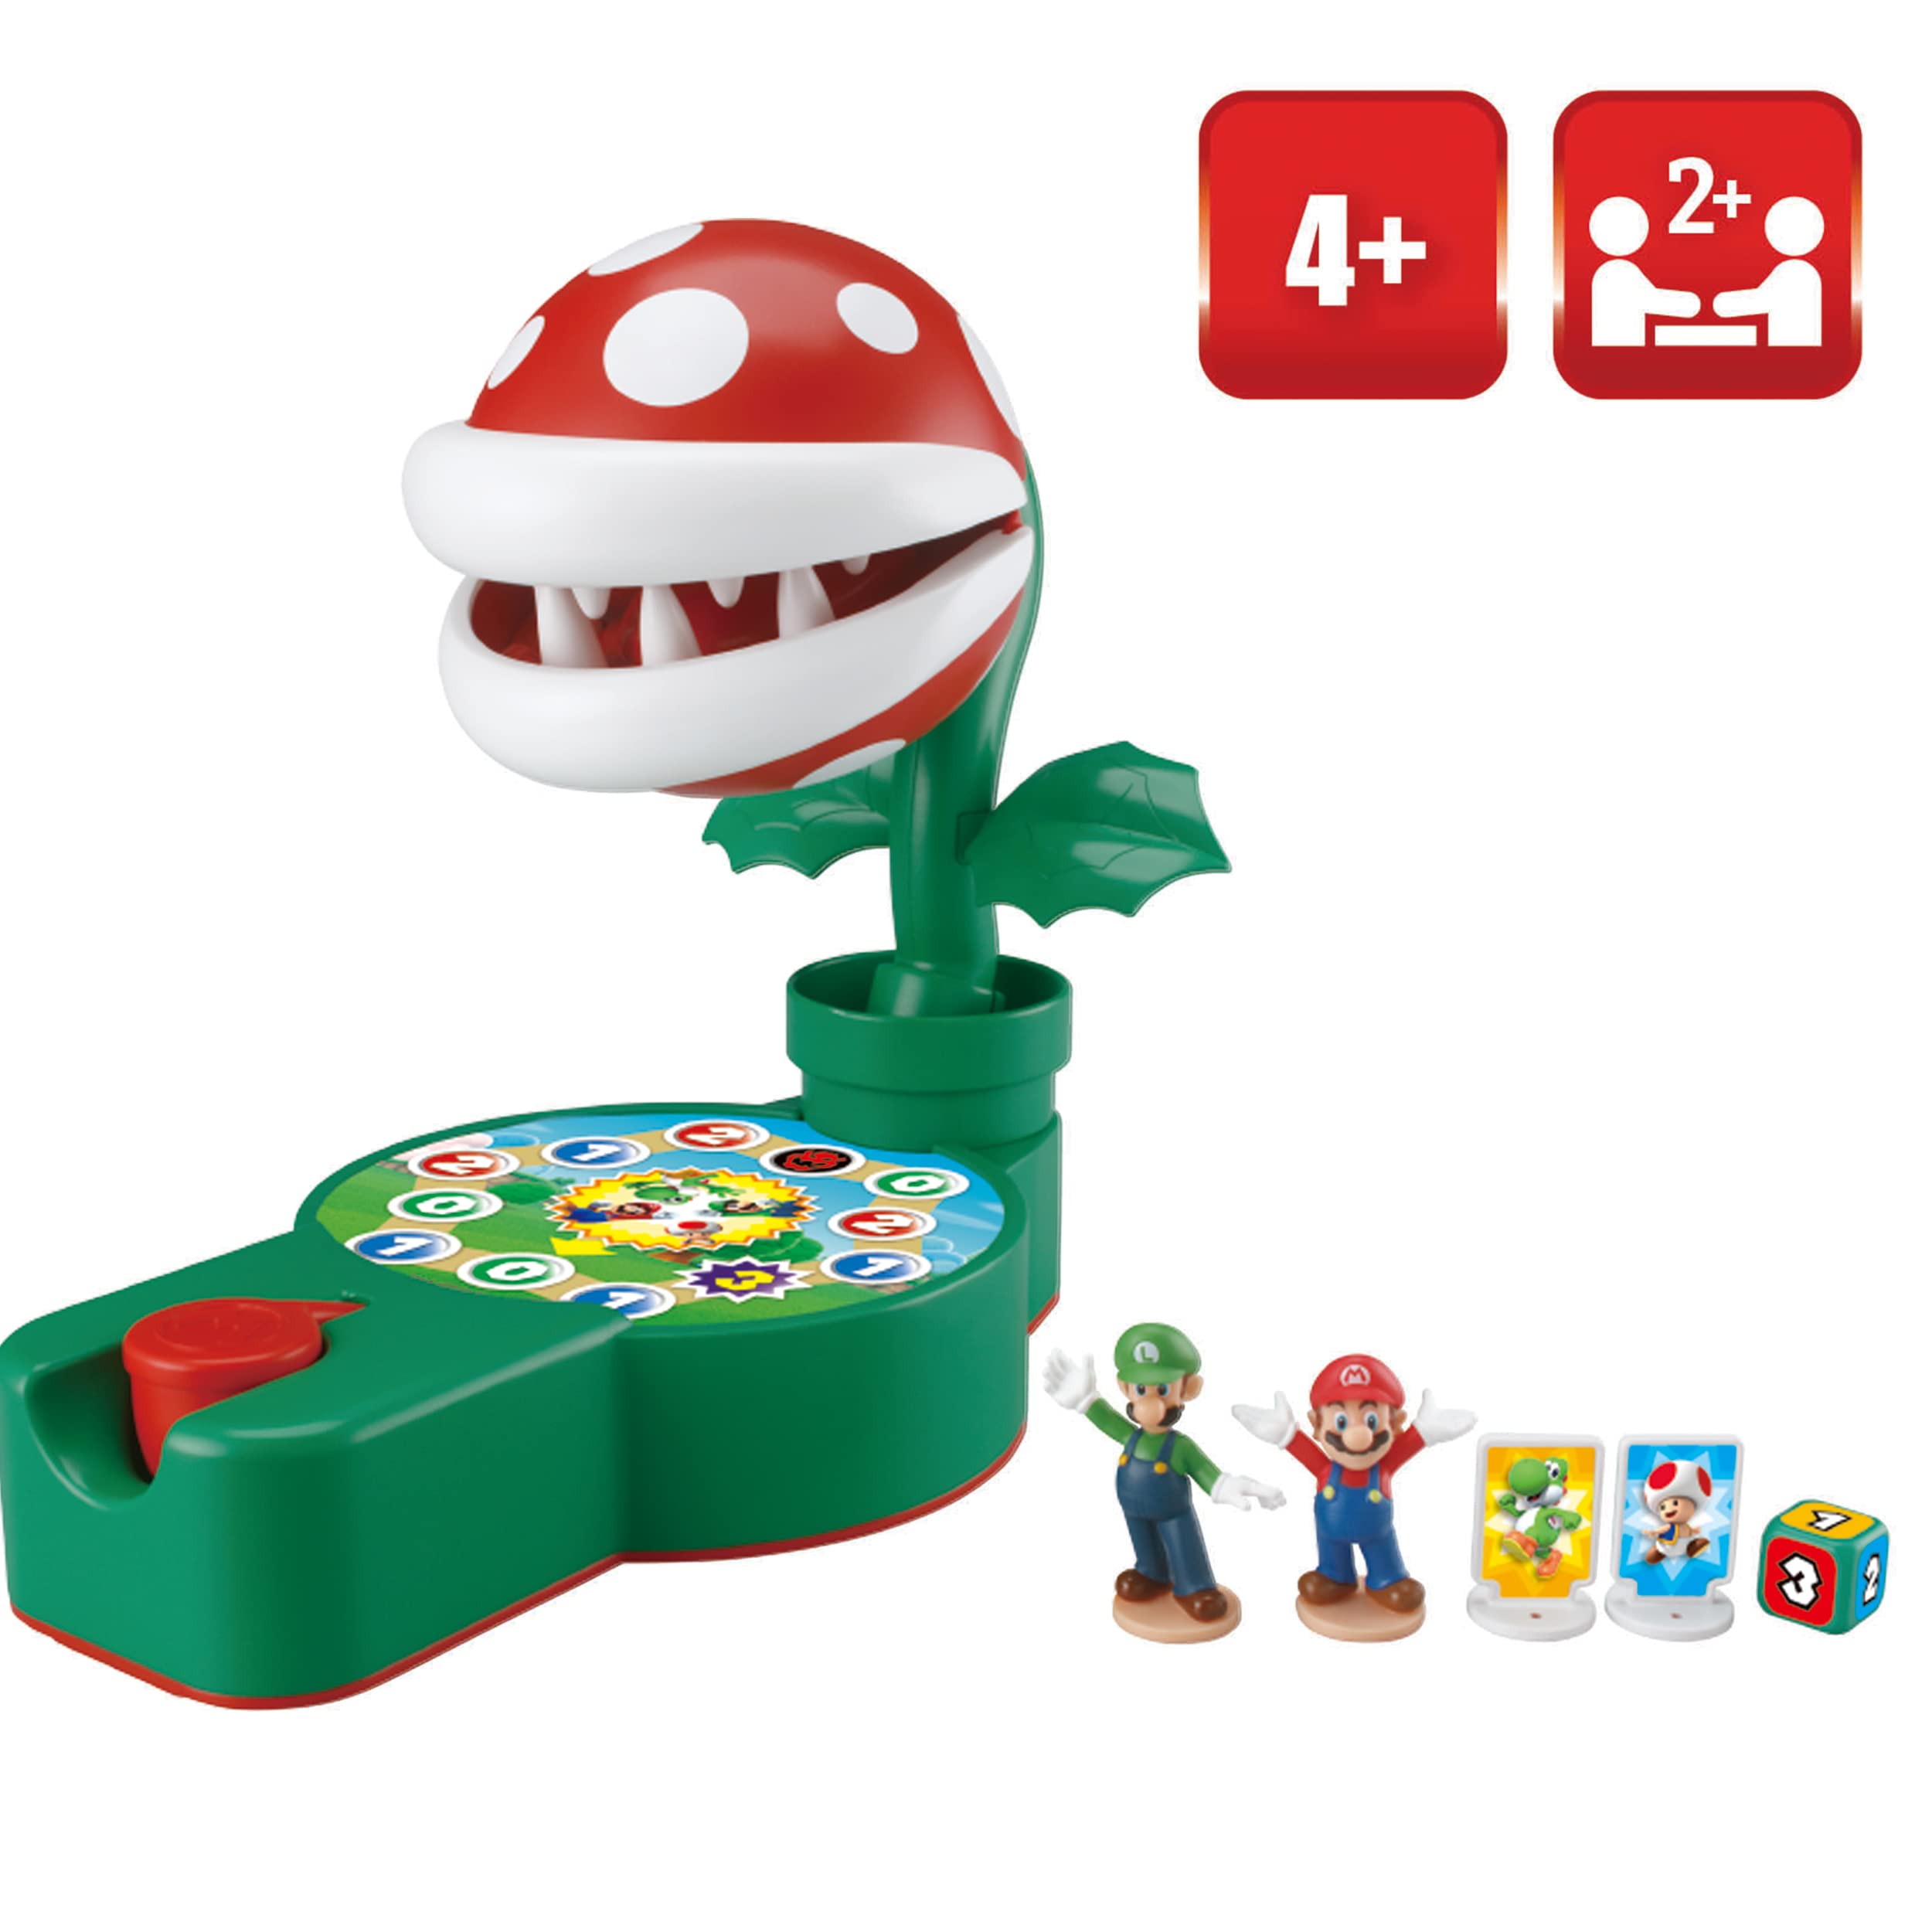 Epoch Games Super Mario Piranha Plant Escape!, Tabletop Action Game for Ages 4+ with 2 Collectible Super Mario Action Figures